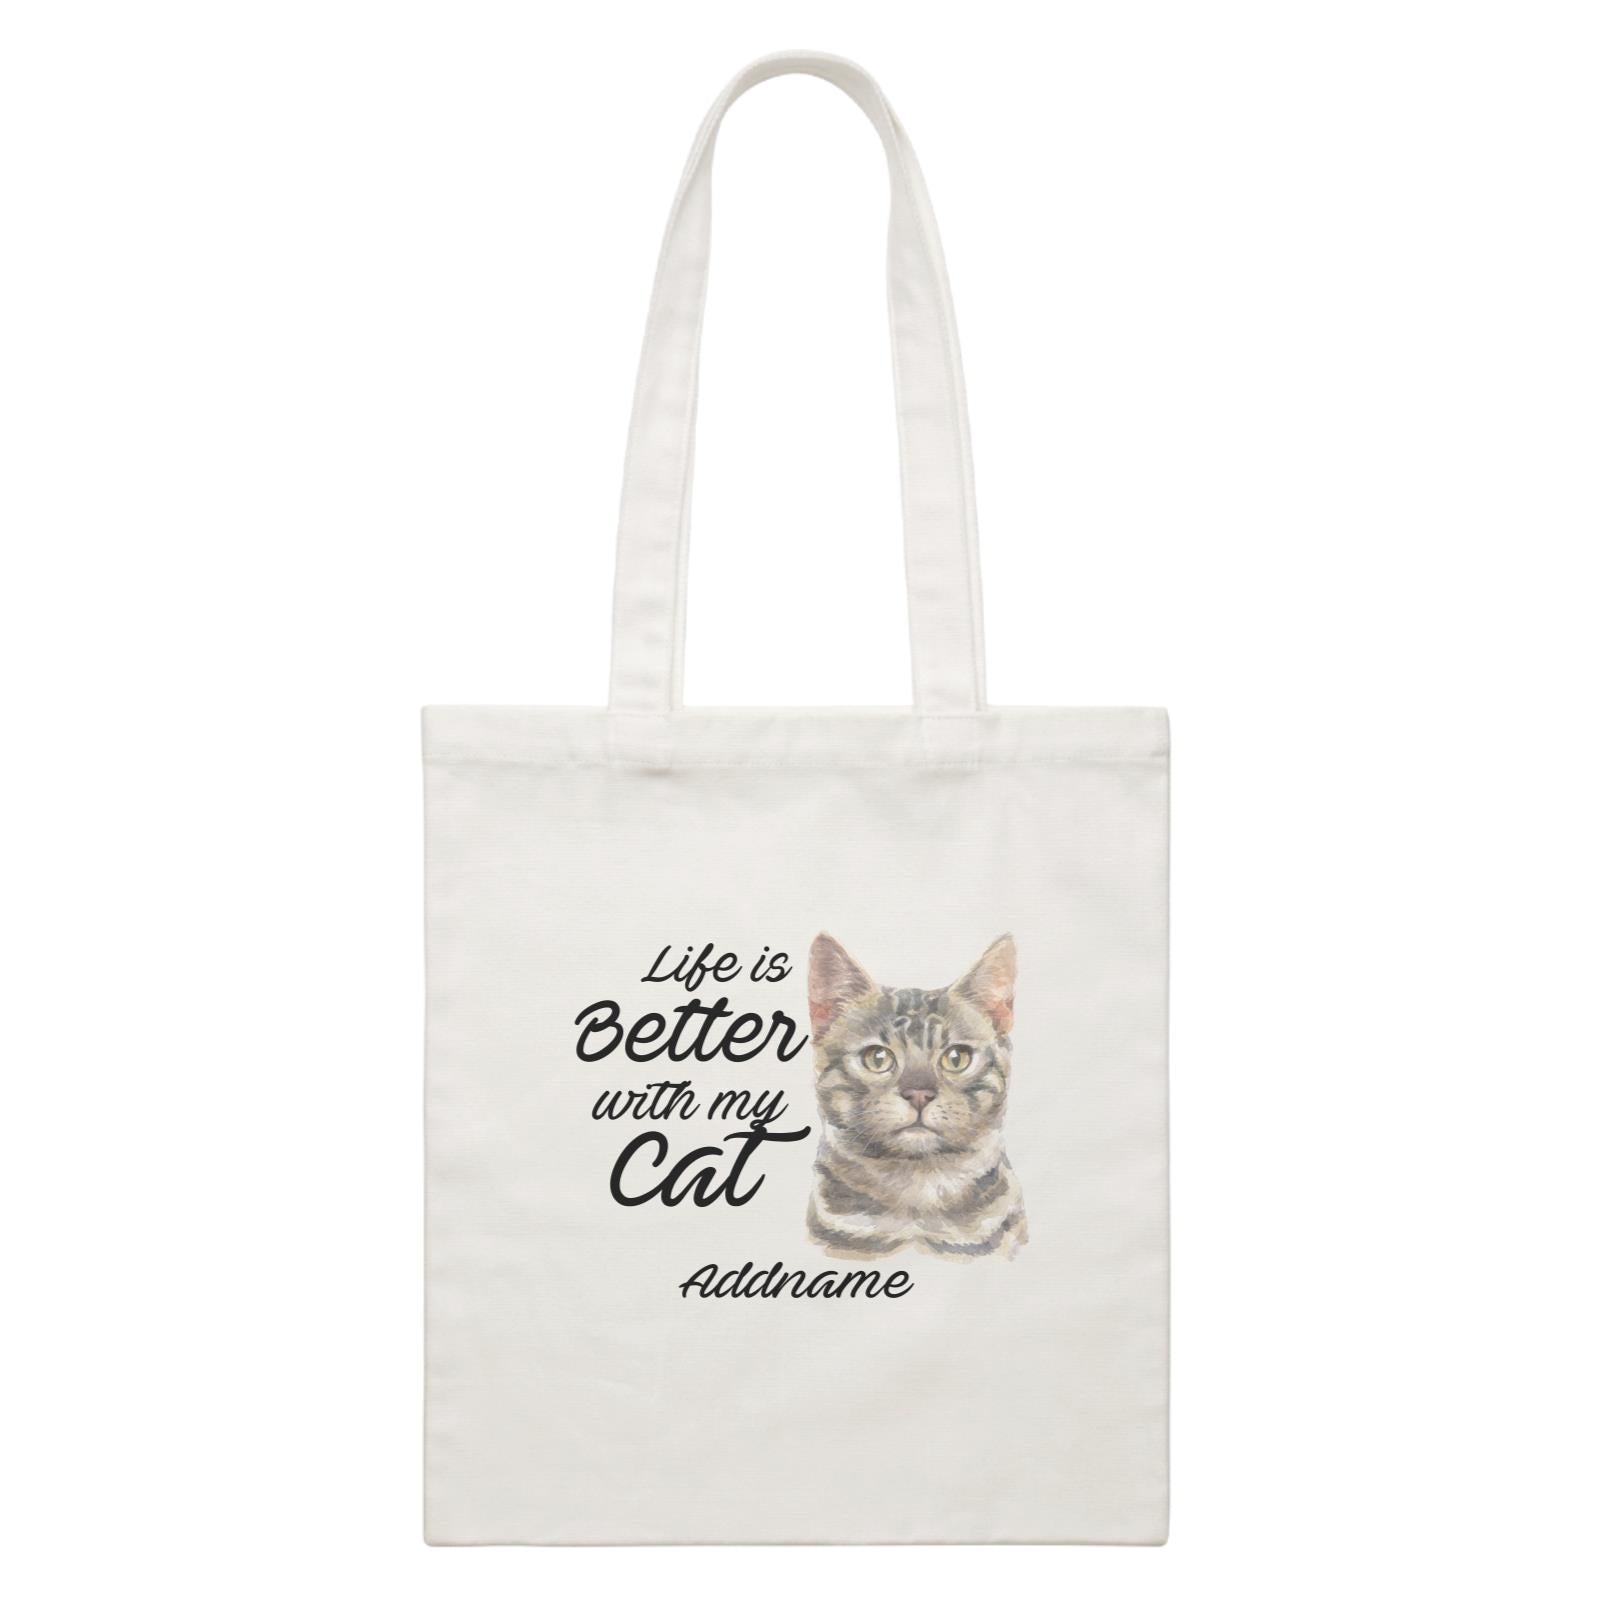 Watercolor Life is Better With My Cat Bengal Grey Addname White Canvas Bag